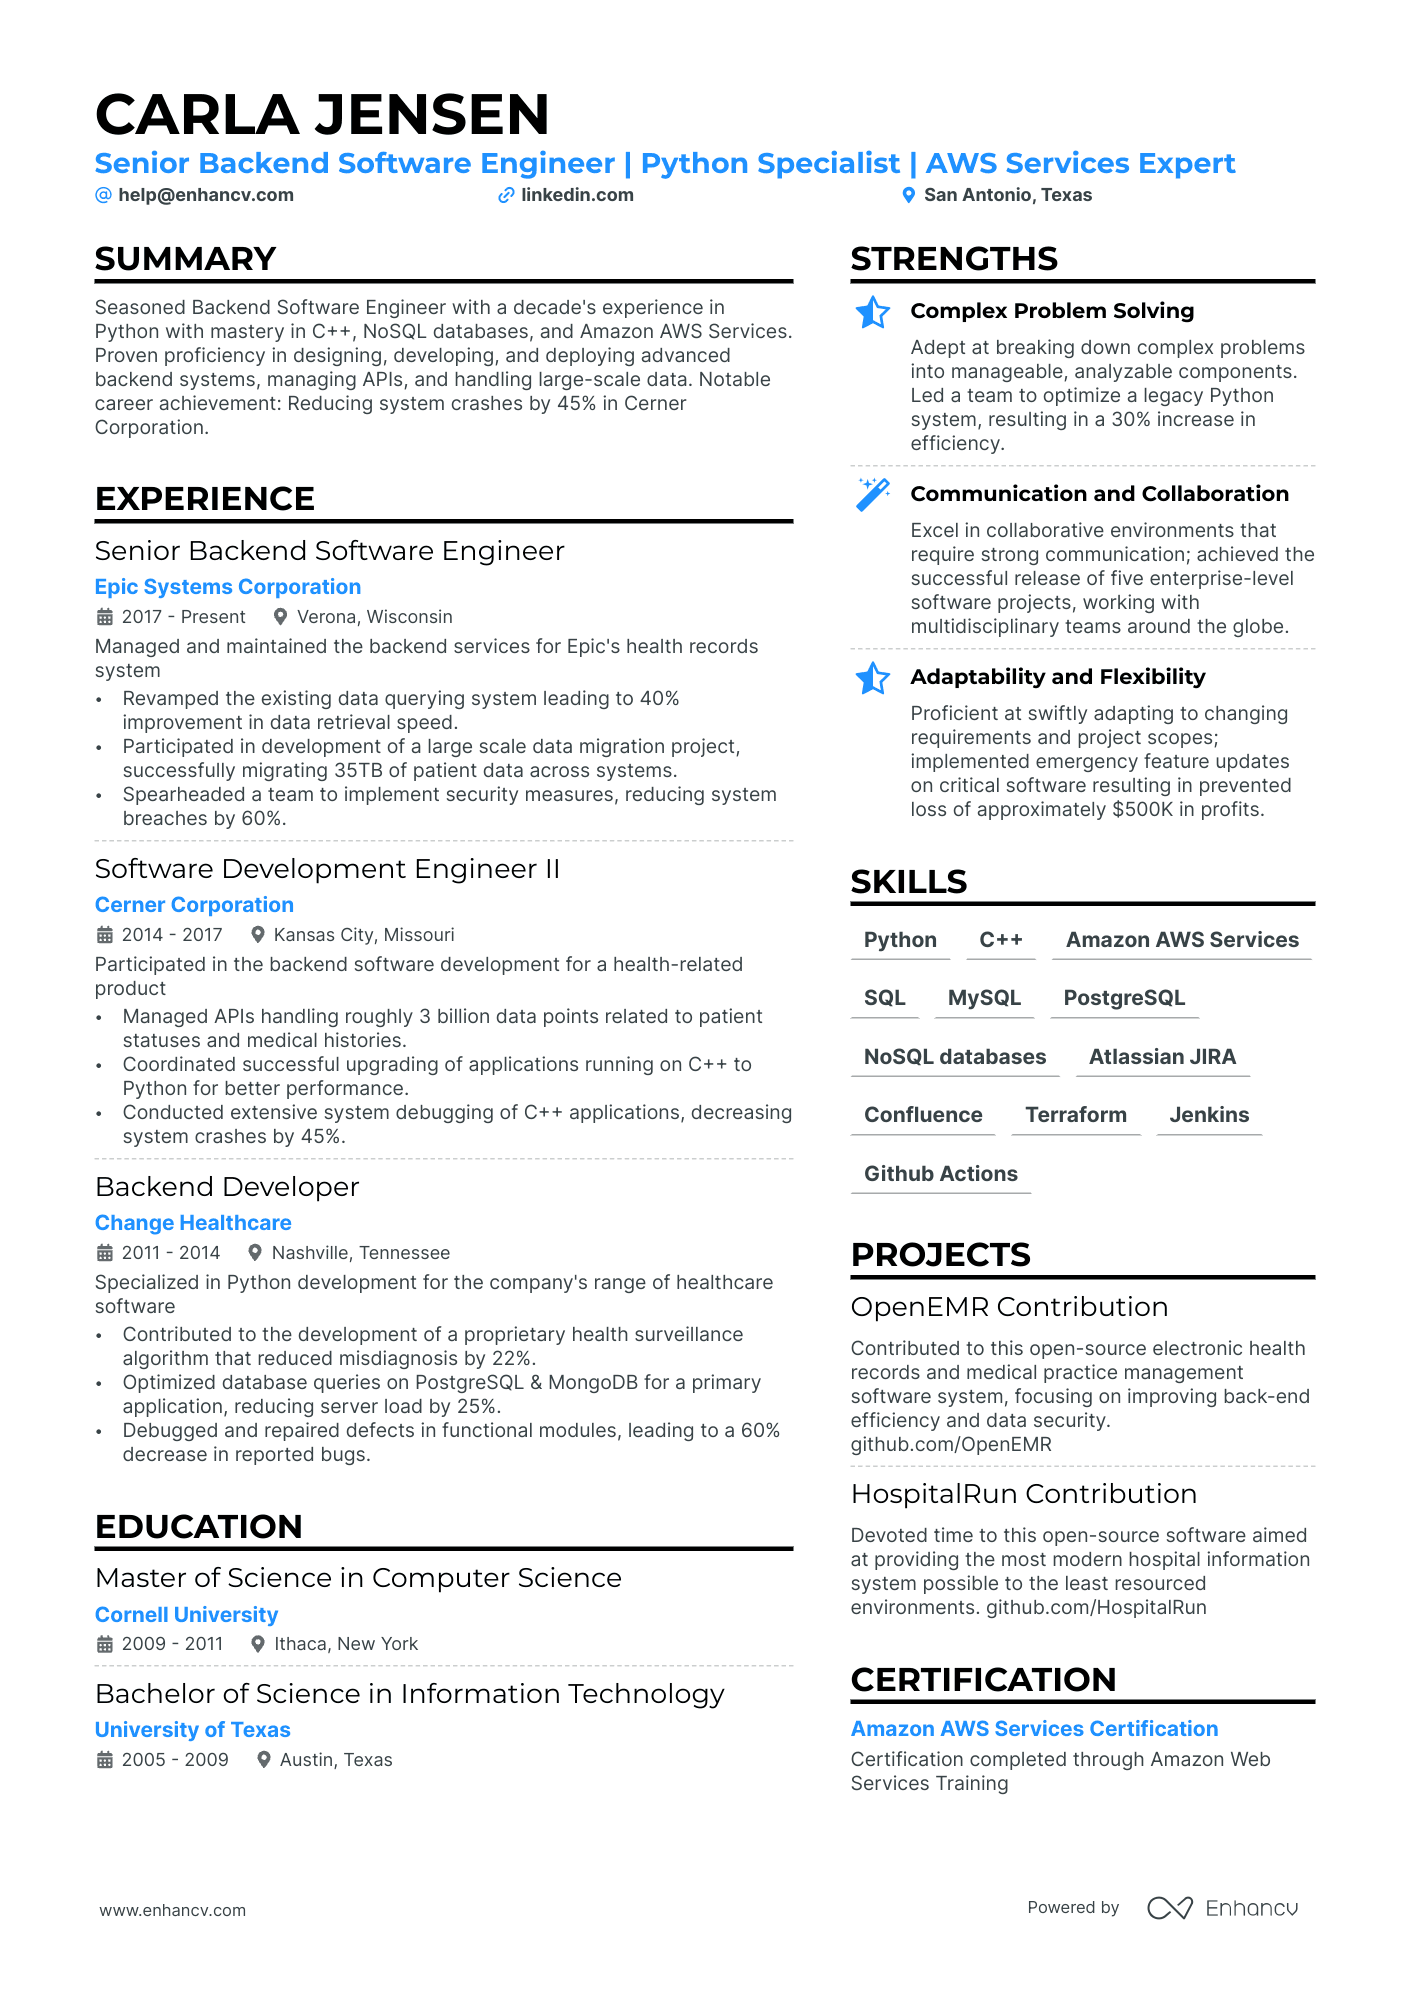 Application Security Engineer resume example